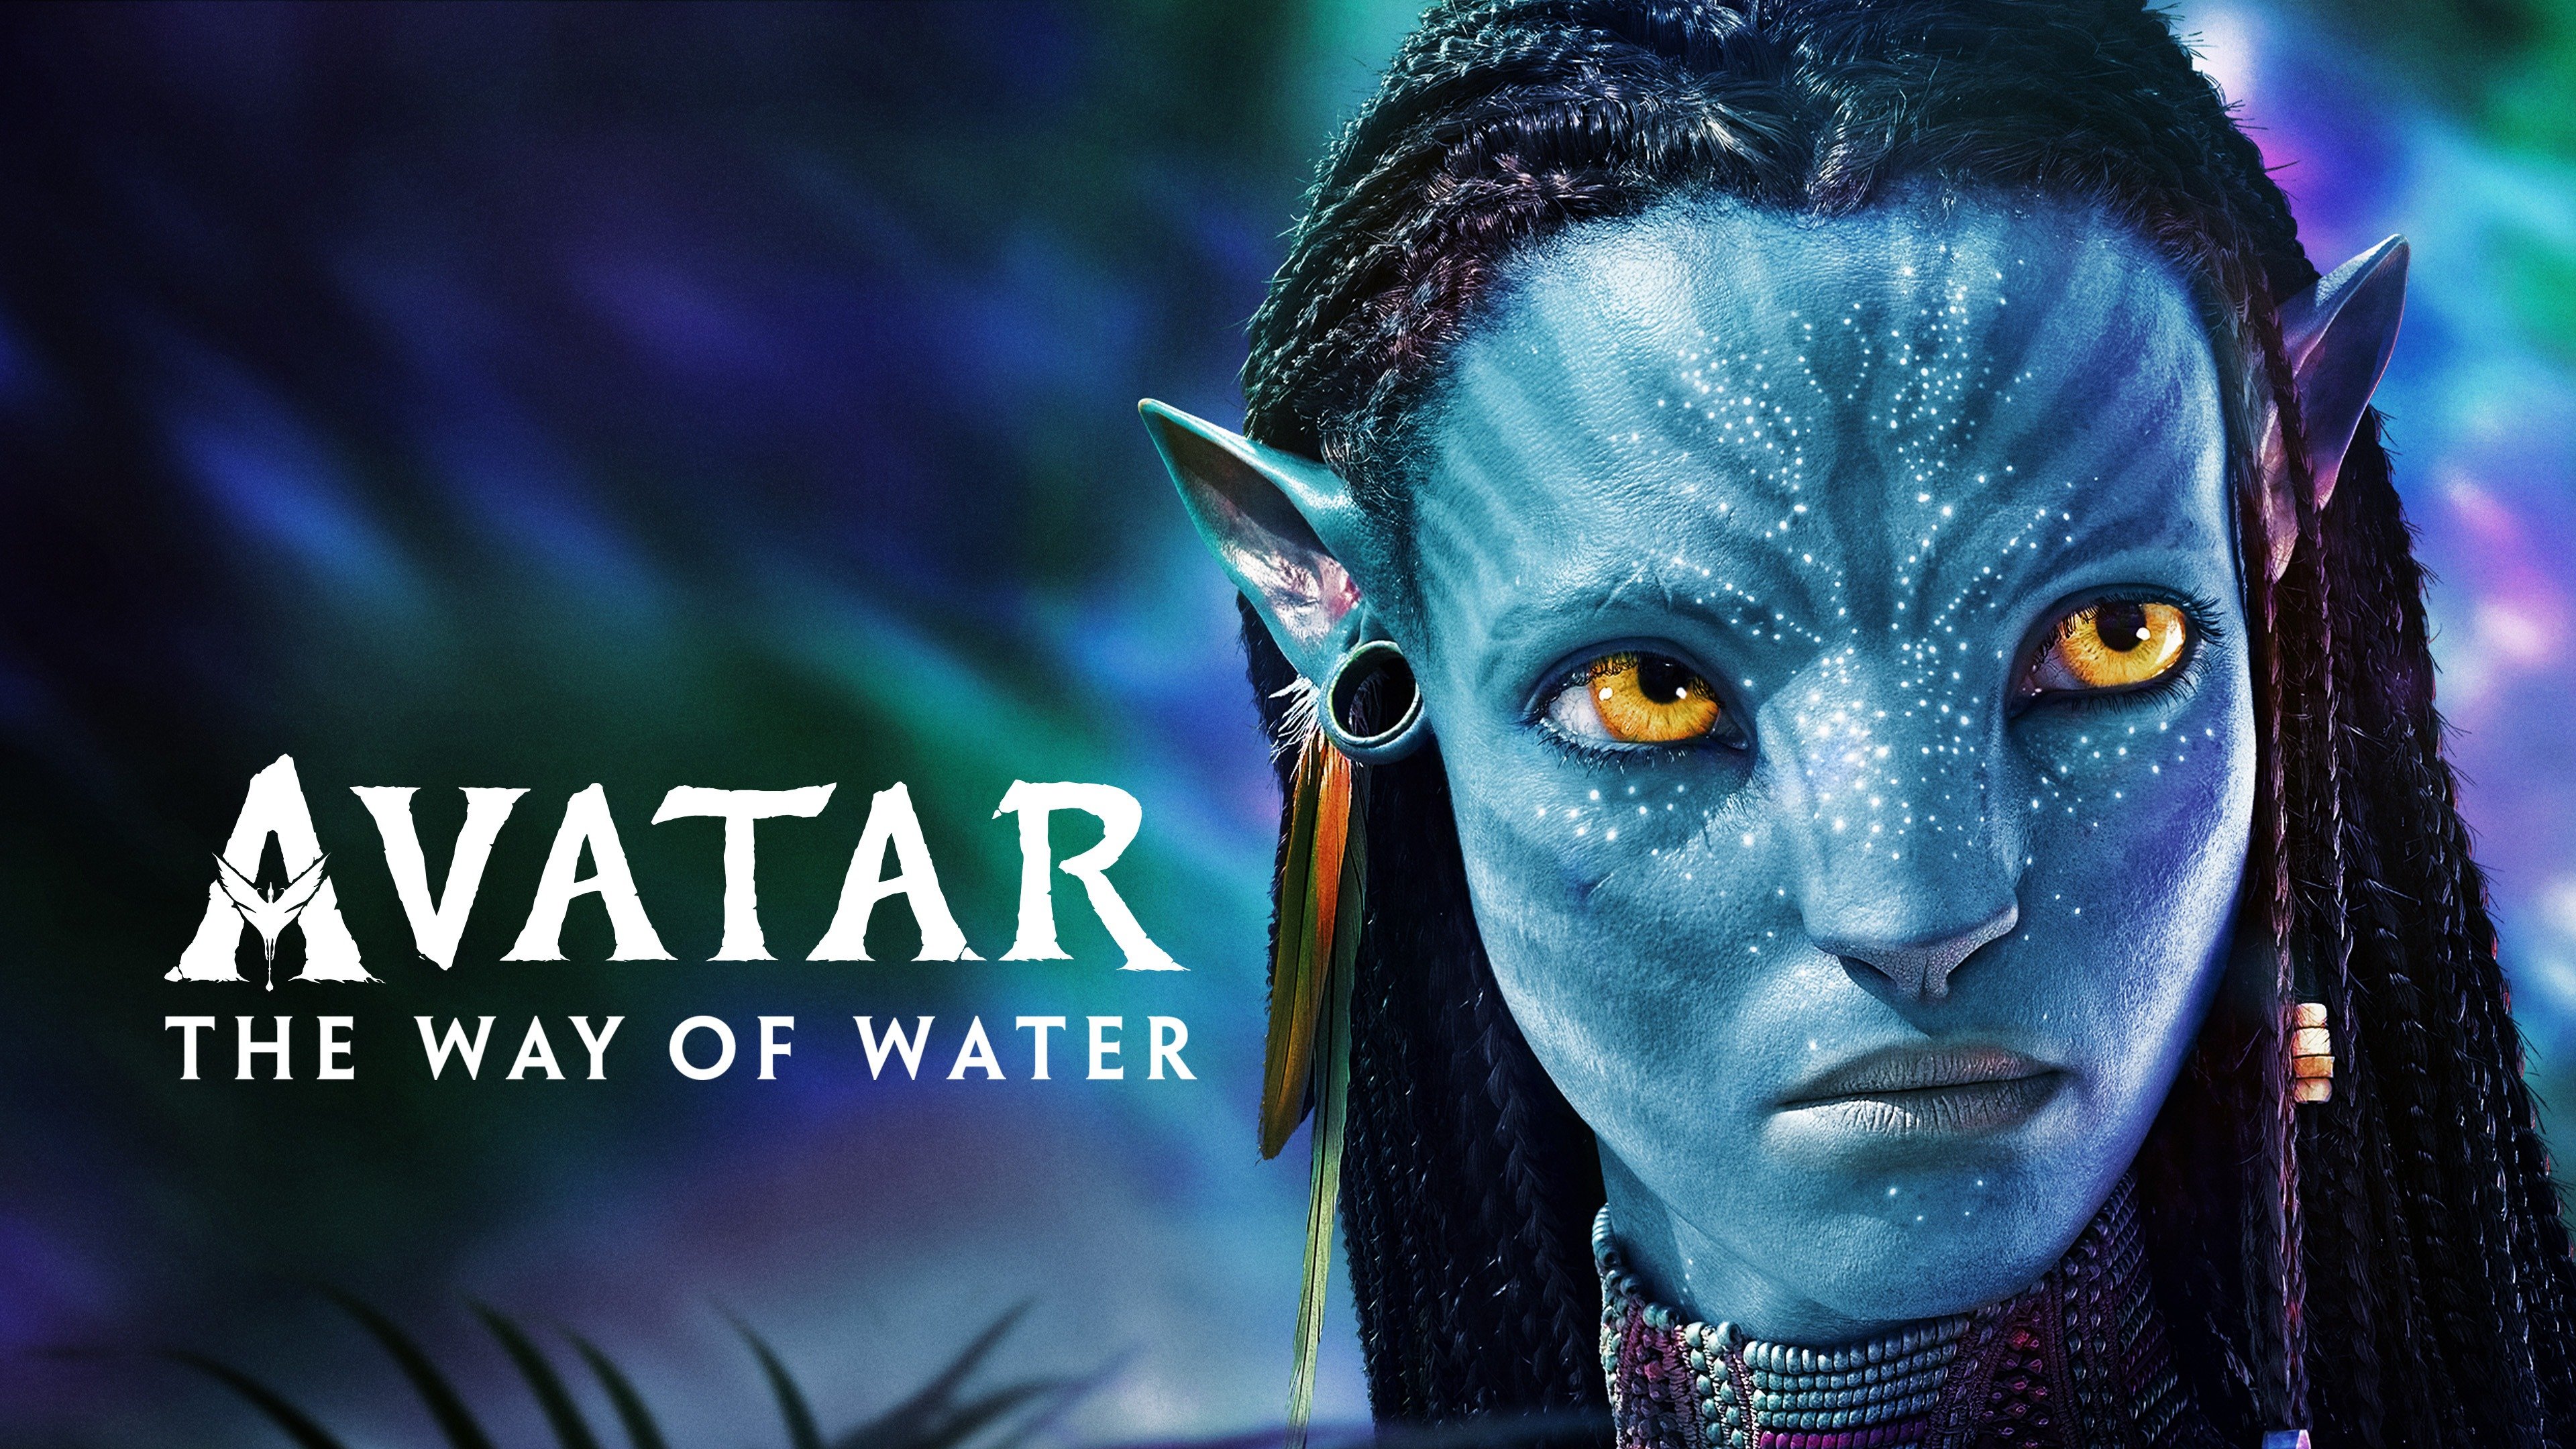 Avatar The Way of Water - VOD/Rent Movie